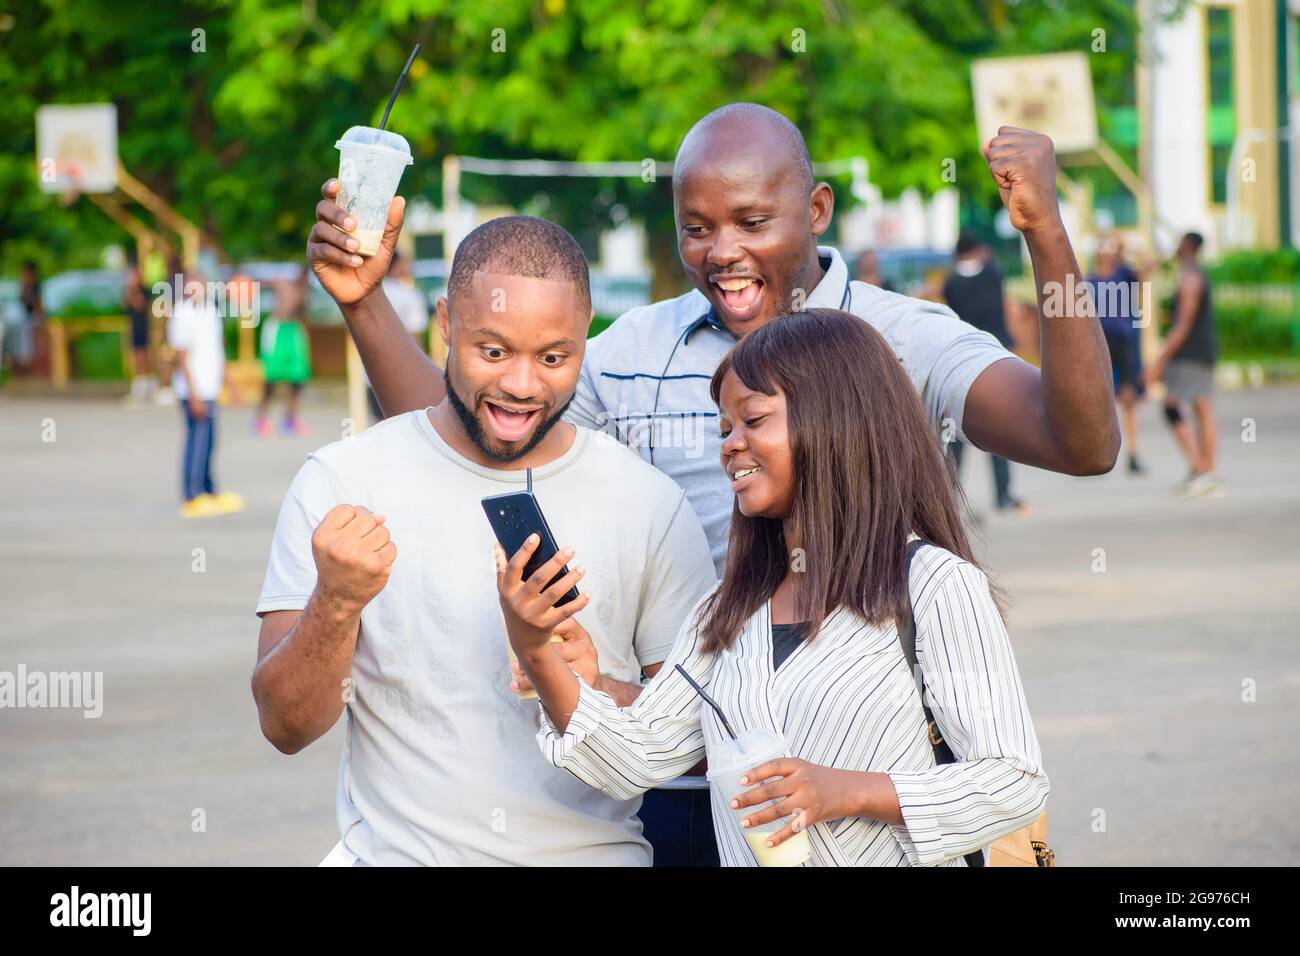 happy group of African friends consisting of two guys and a lady joyfully looking at a smart phone in an outdoor park while jubilating Stock Photo